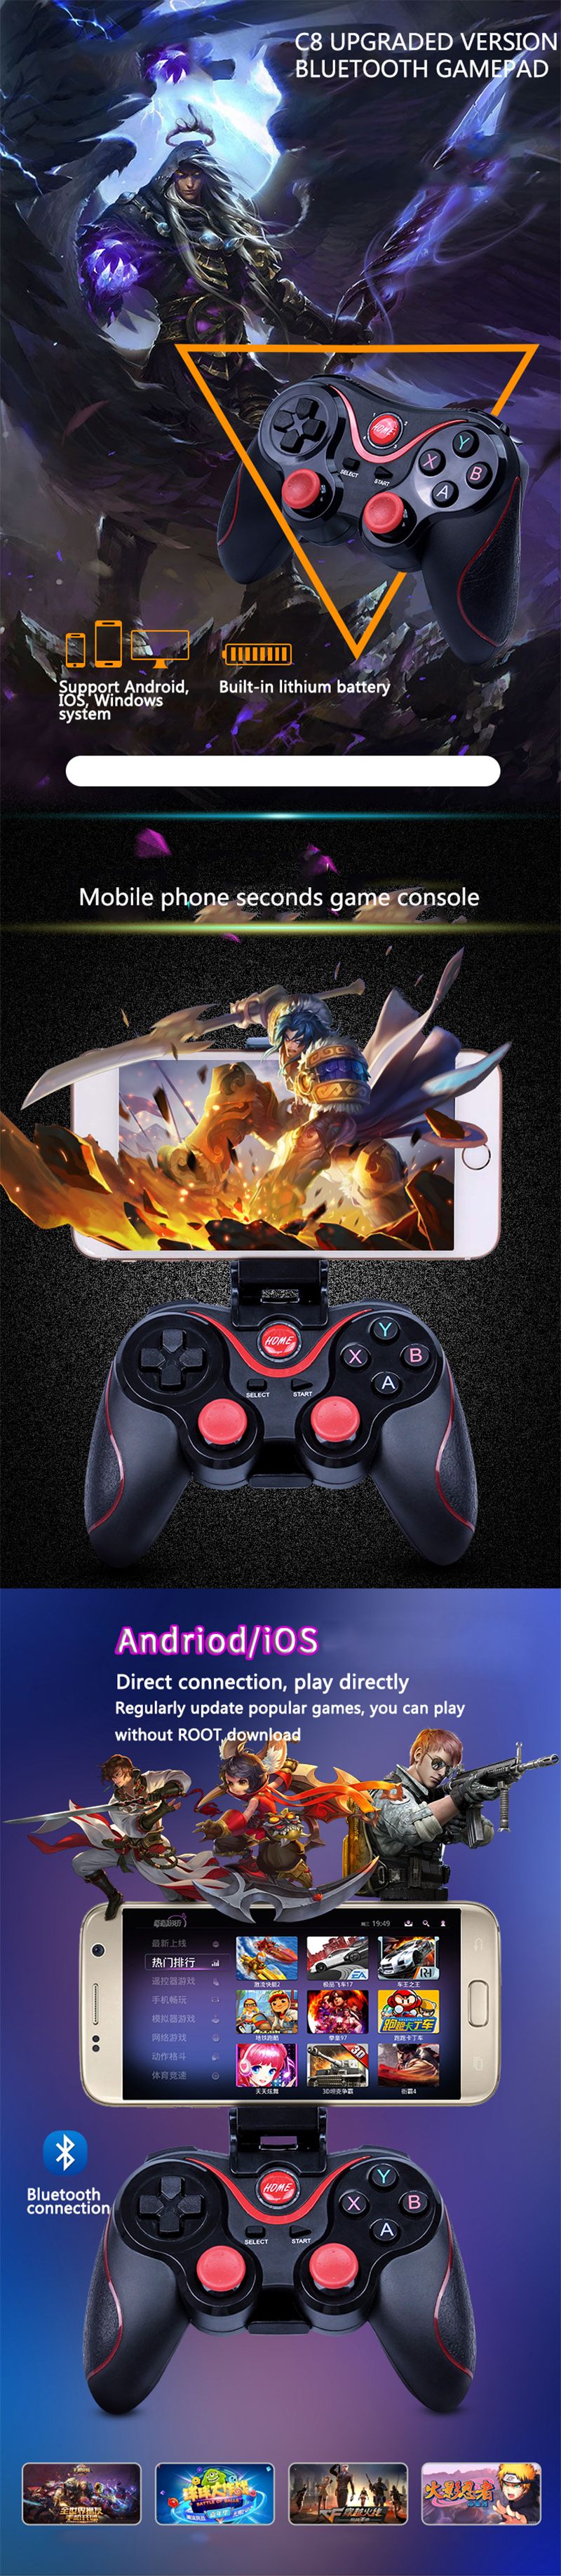 C8-Upgraded-bluetooth-Gamepad-Game-Controller-for-PUBG-Mobile-for-iOS-Android-Phone-for-Windows-PC-T-1466808